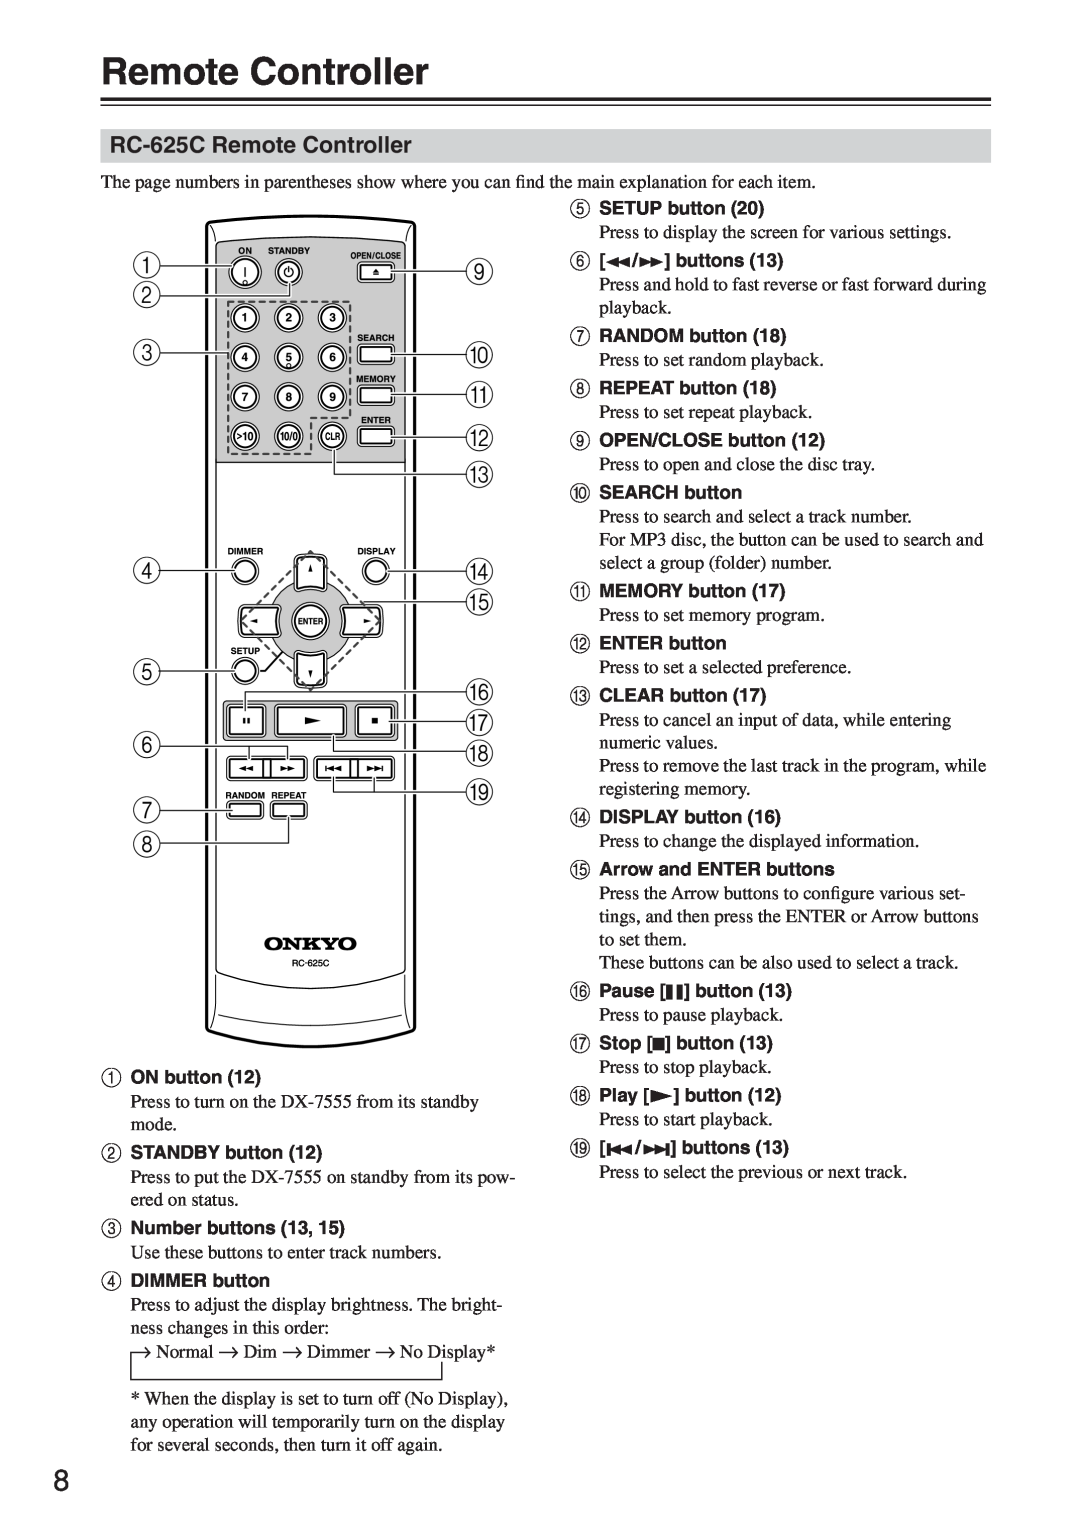 Onkyo DX-7555 instruction manual Remote Controller 